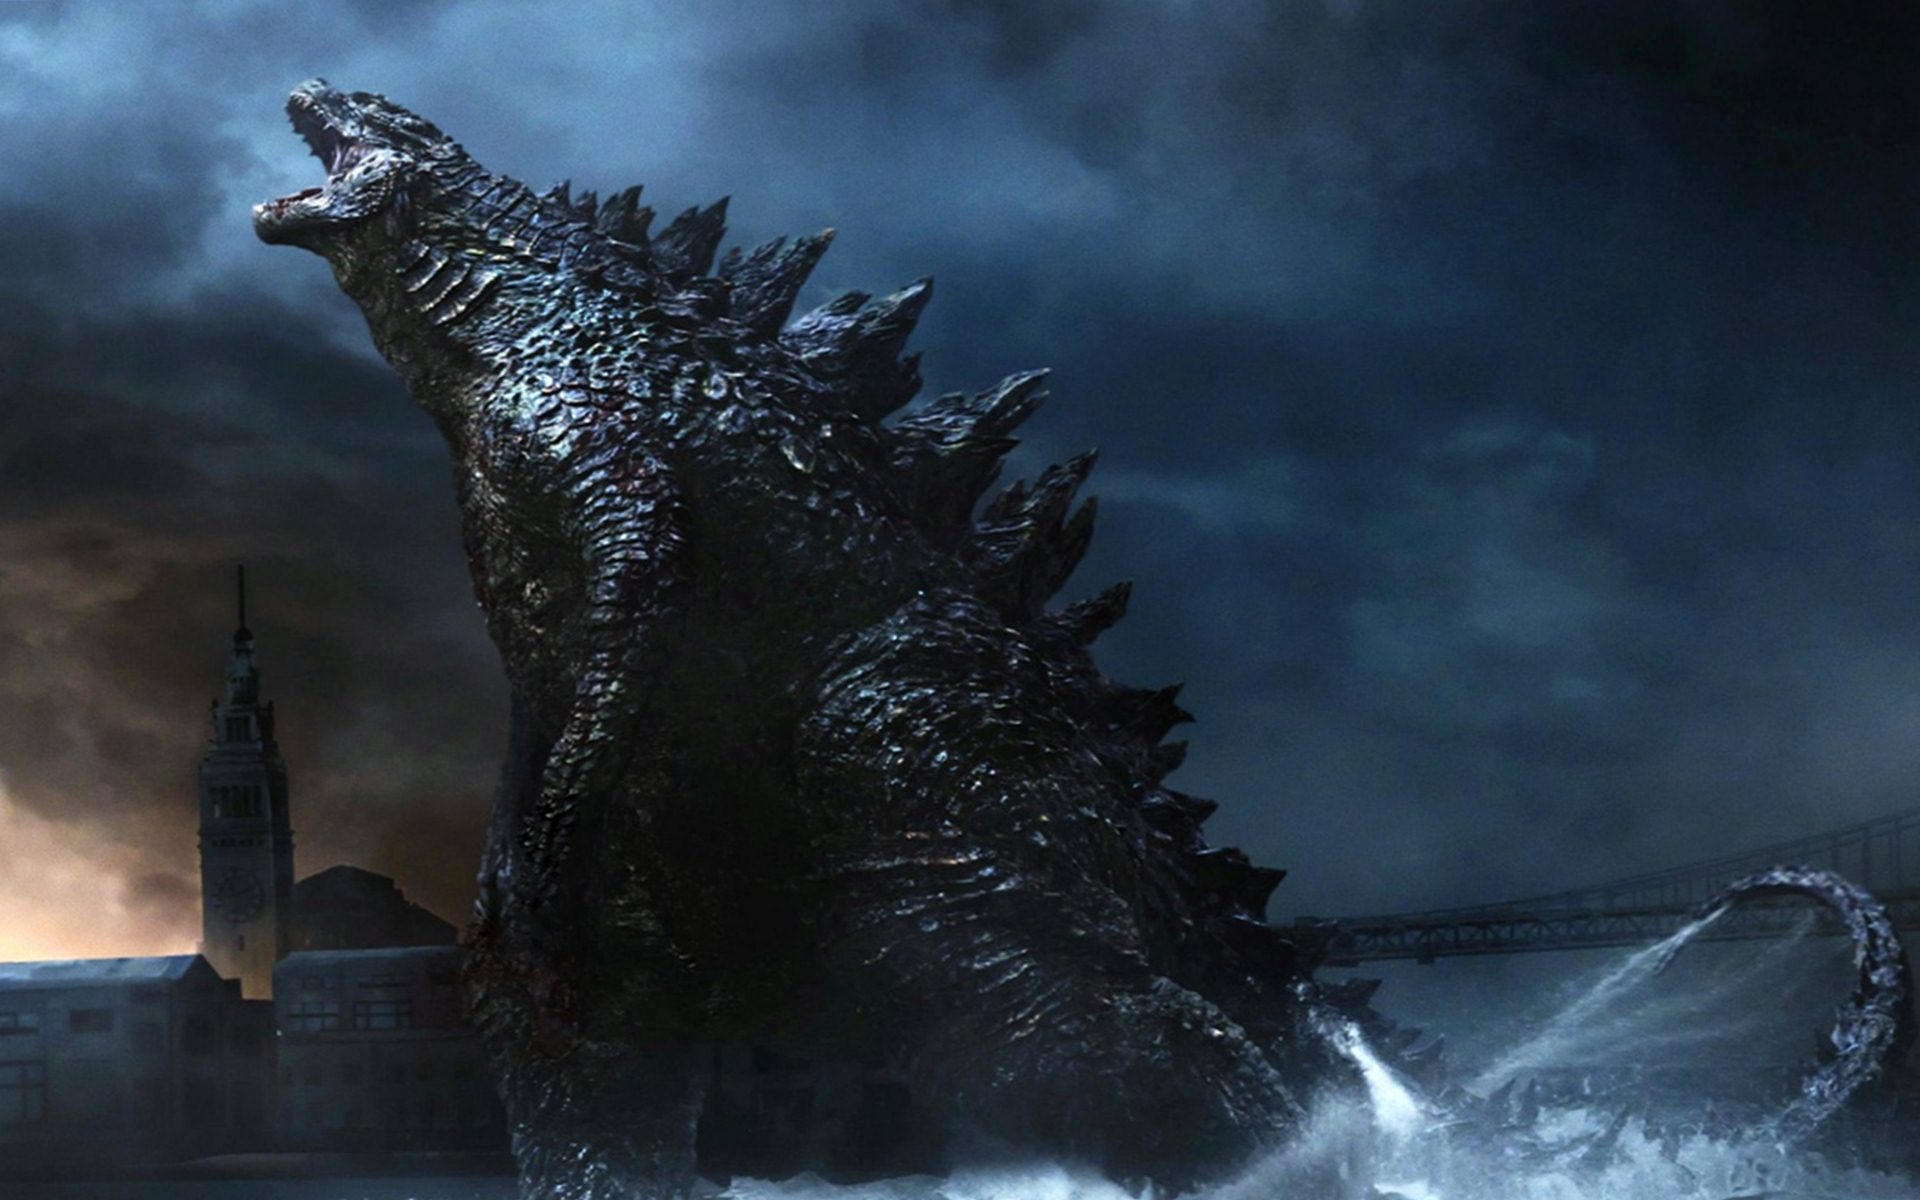 Godzilla 2014 Free Wallpaper Background For Co 3493 Wallpaper Cool